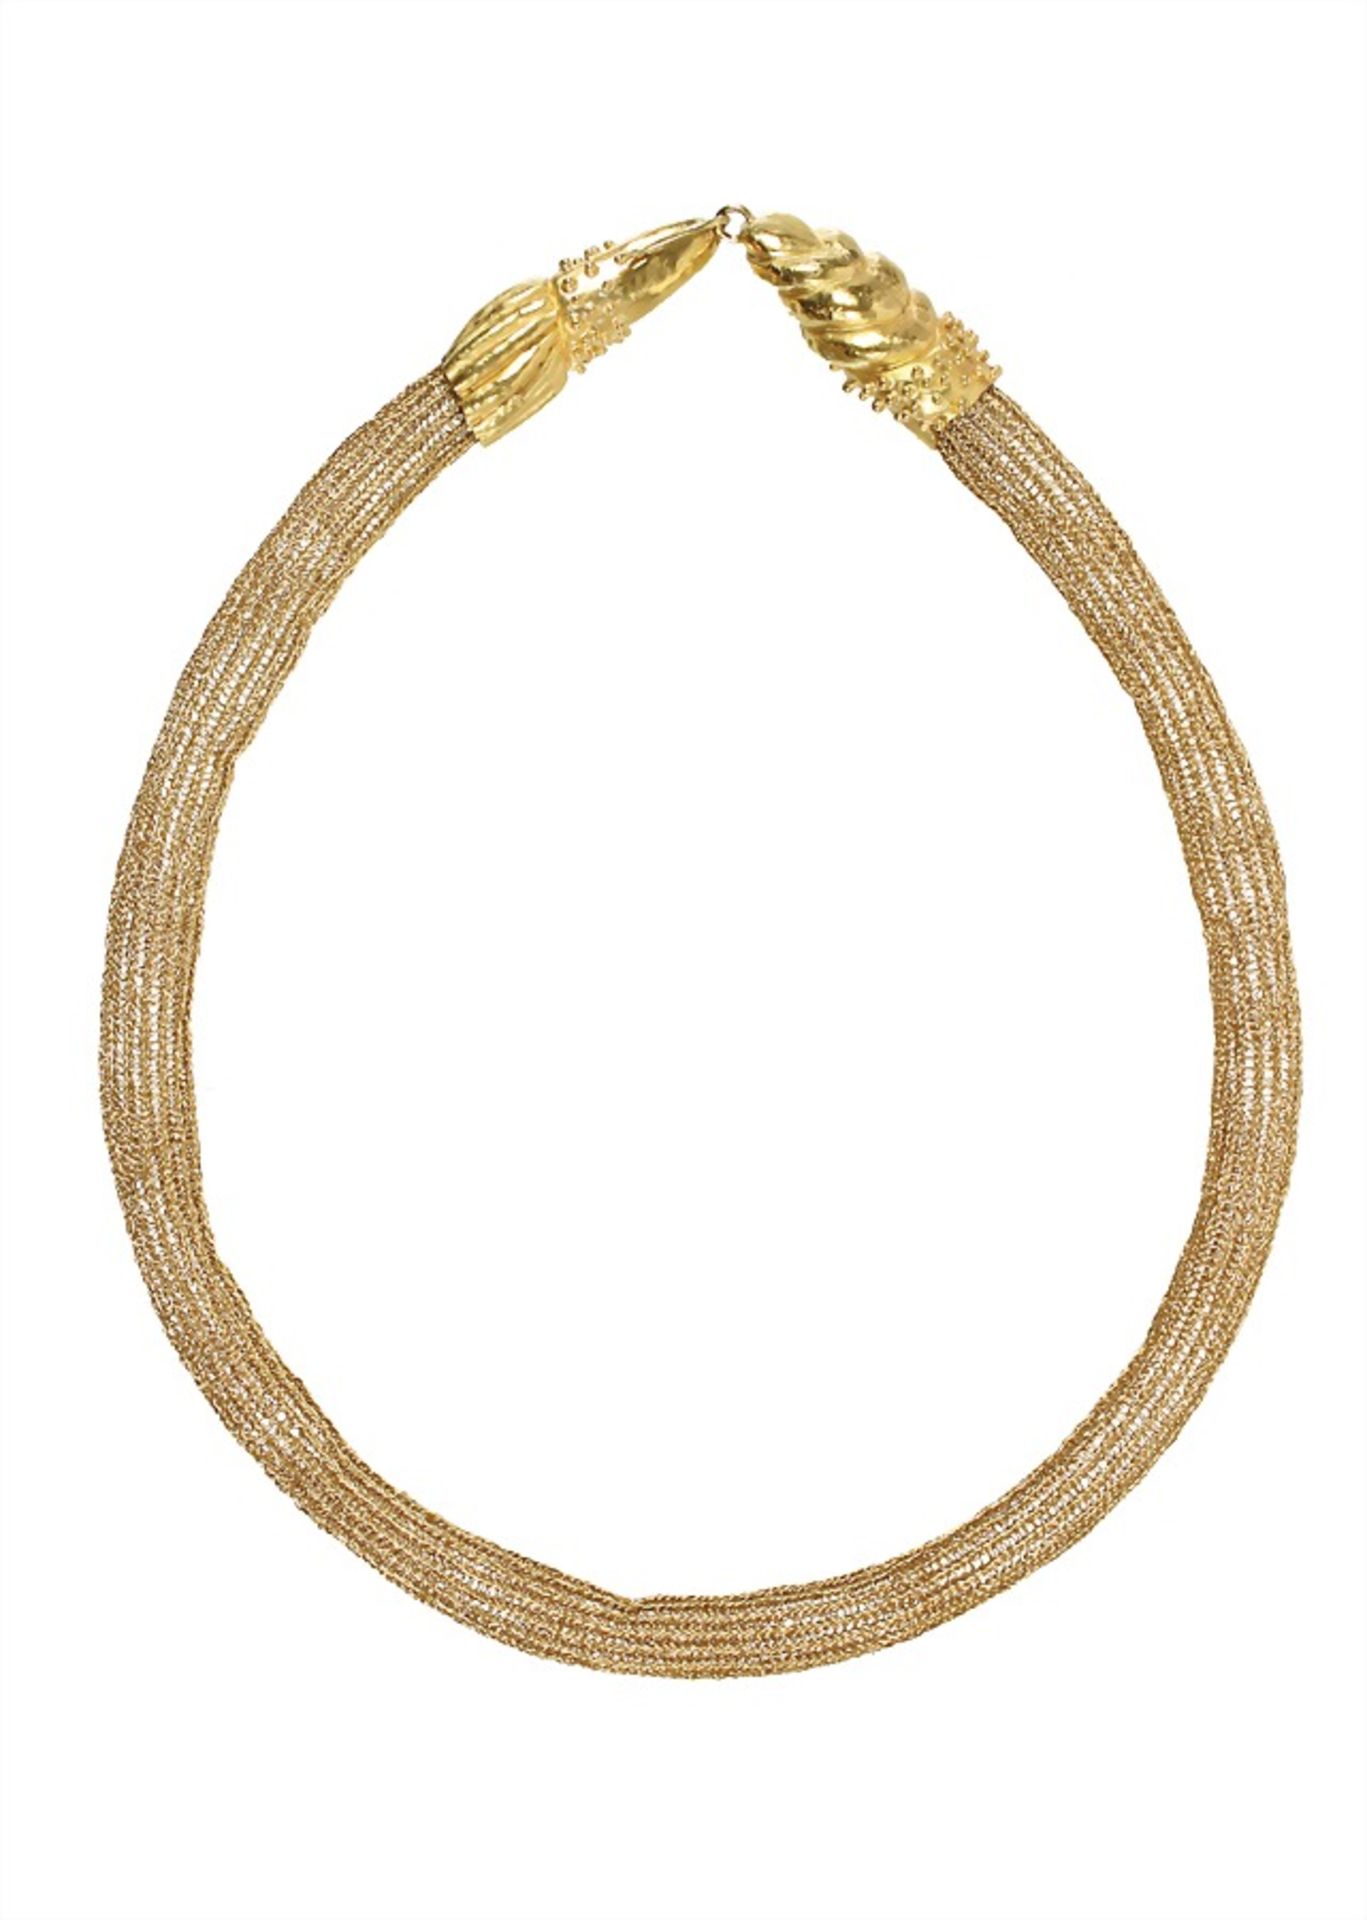 knitted necklace (handmade), yellow gold 900/000, "Margit" WARSCHAUER Maintal, caps on the ...